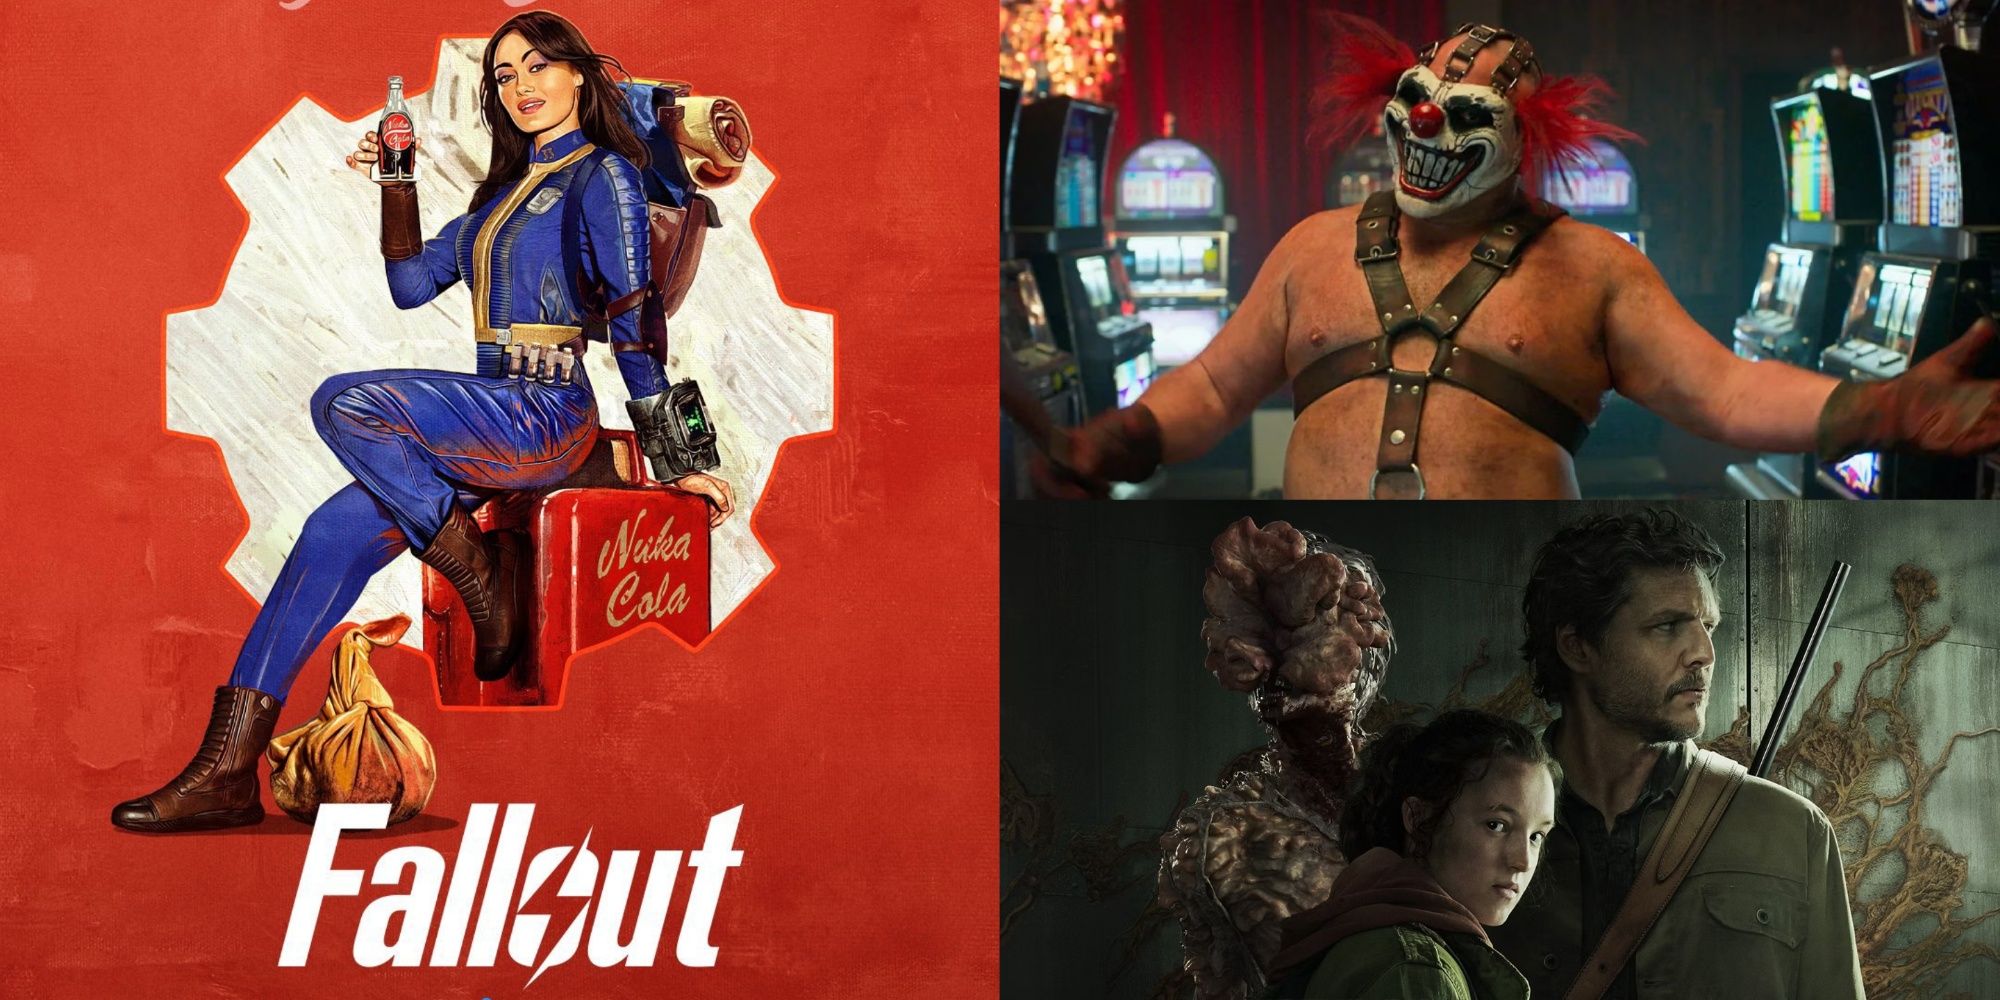 Lucy on a Fallout Poster, Twisted Metal, and Joel & Ellie in HBO's Last Of Us